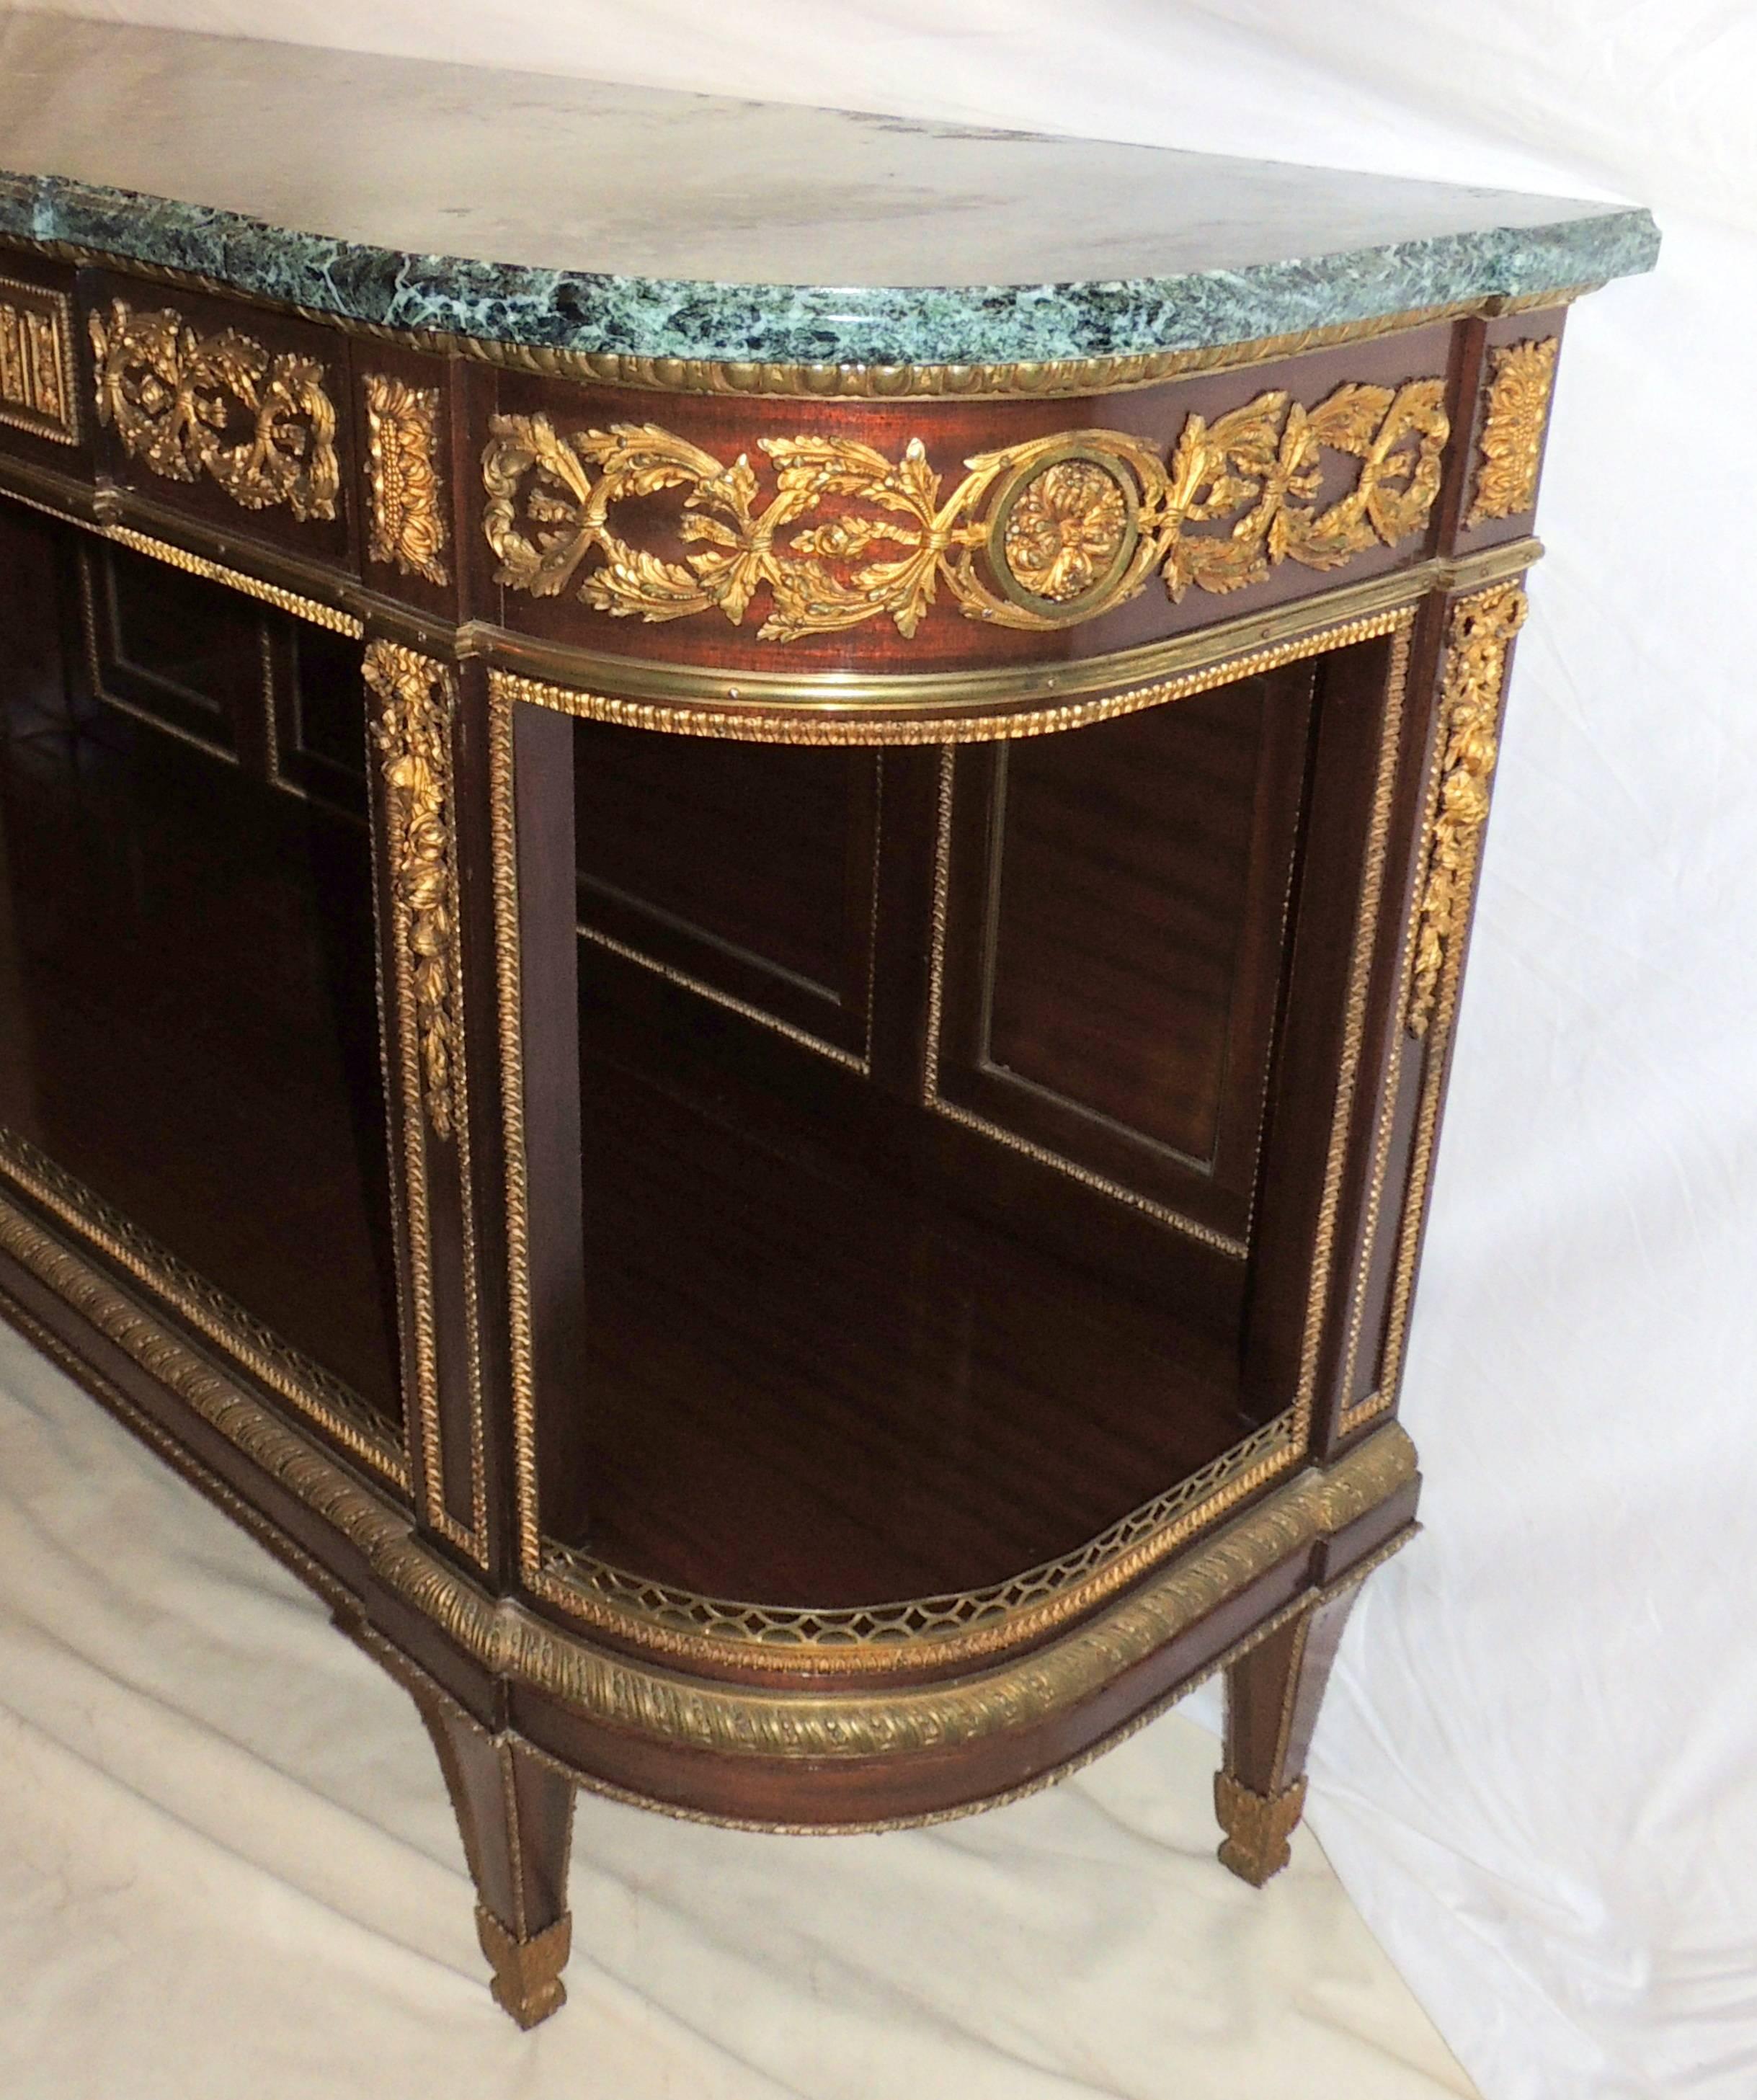 Mid-20th Century Fine French Ormolu Bronze-Mounted Marble-Top Dessert Demilune Console Sideboard